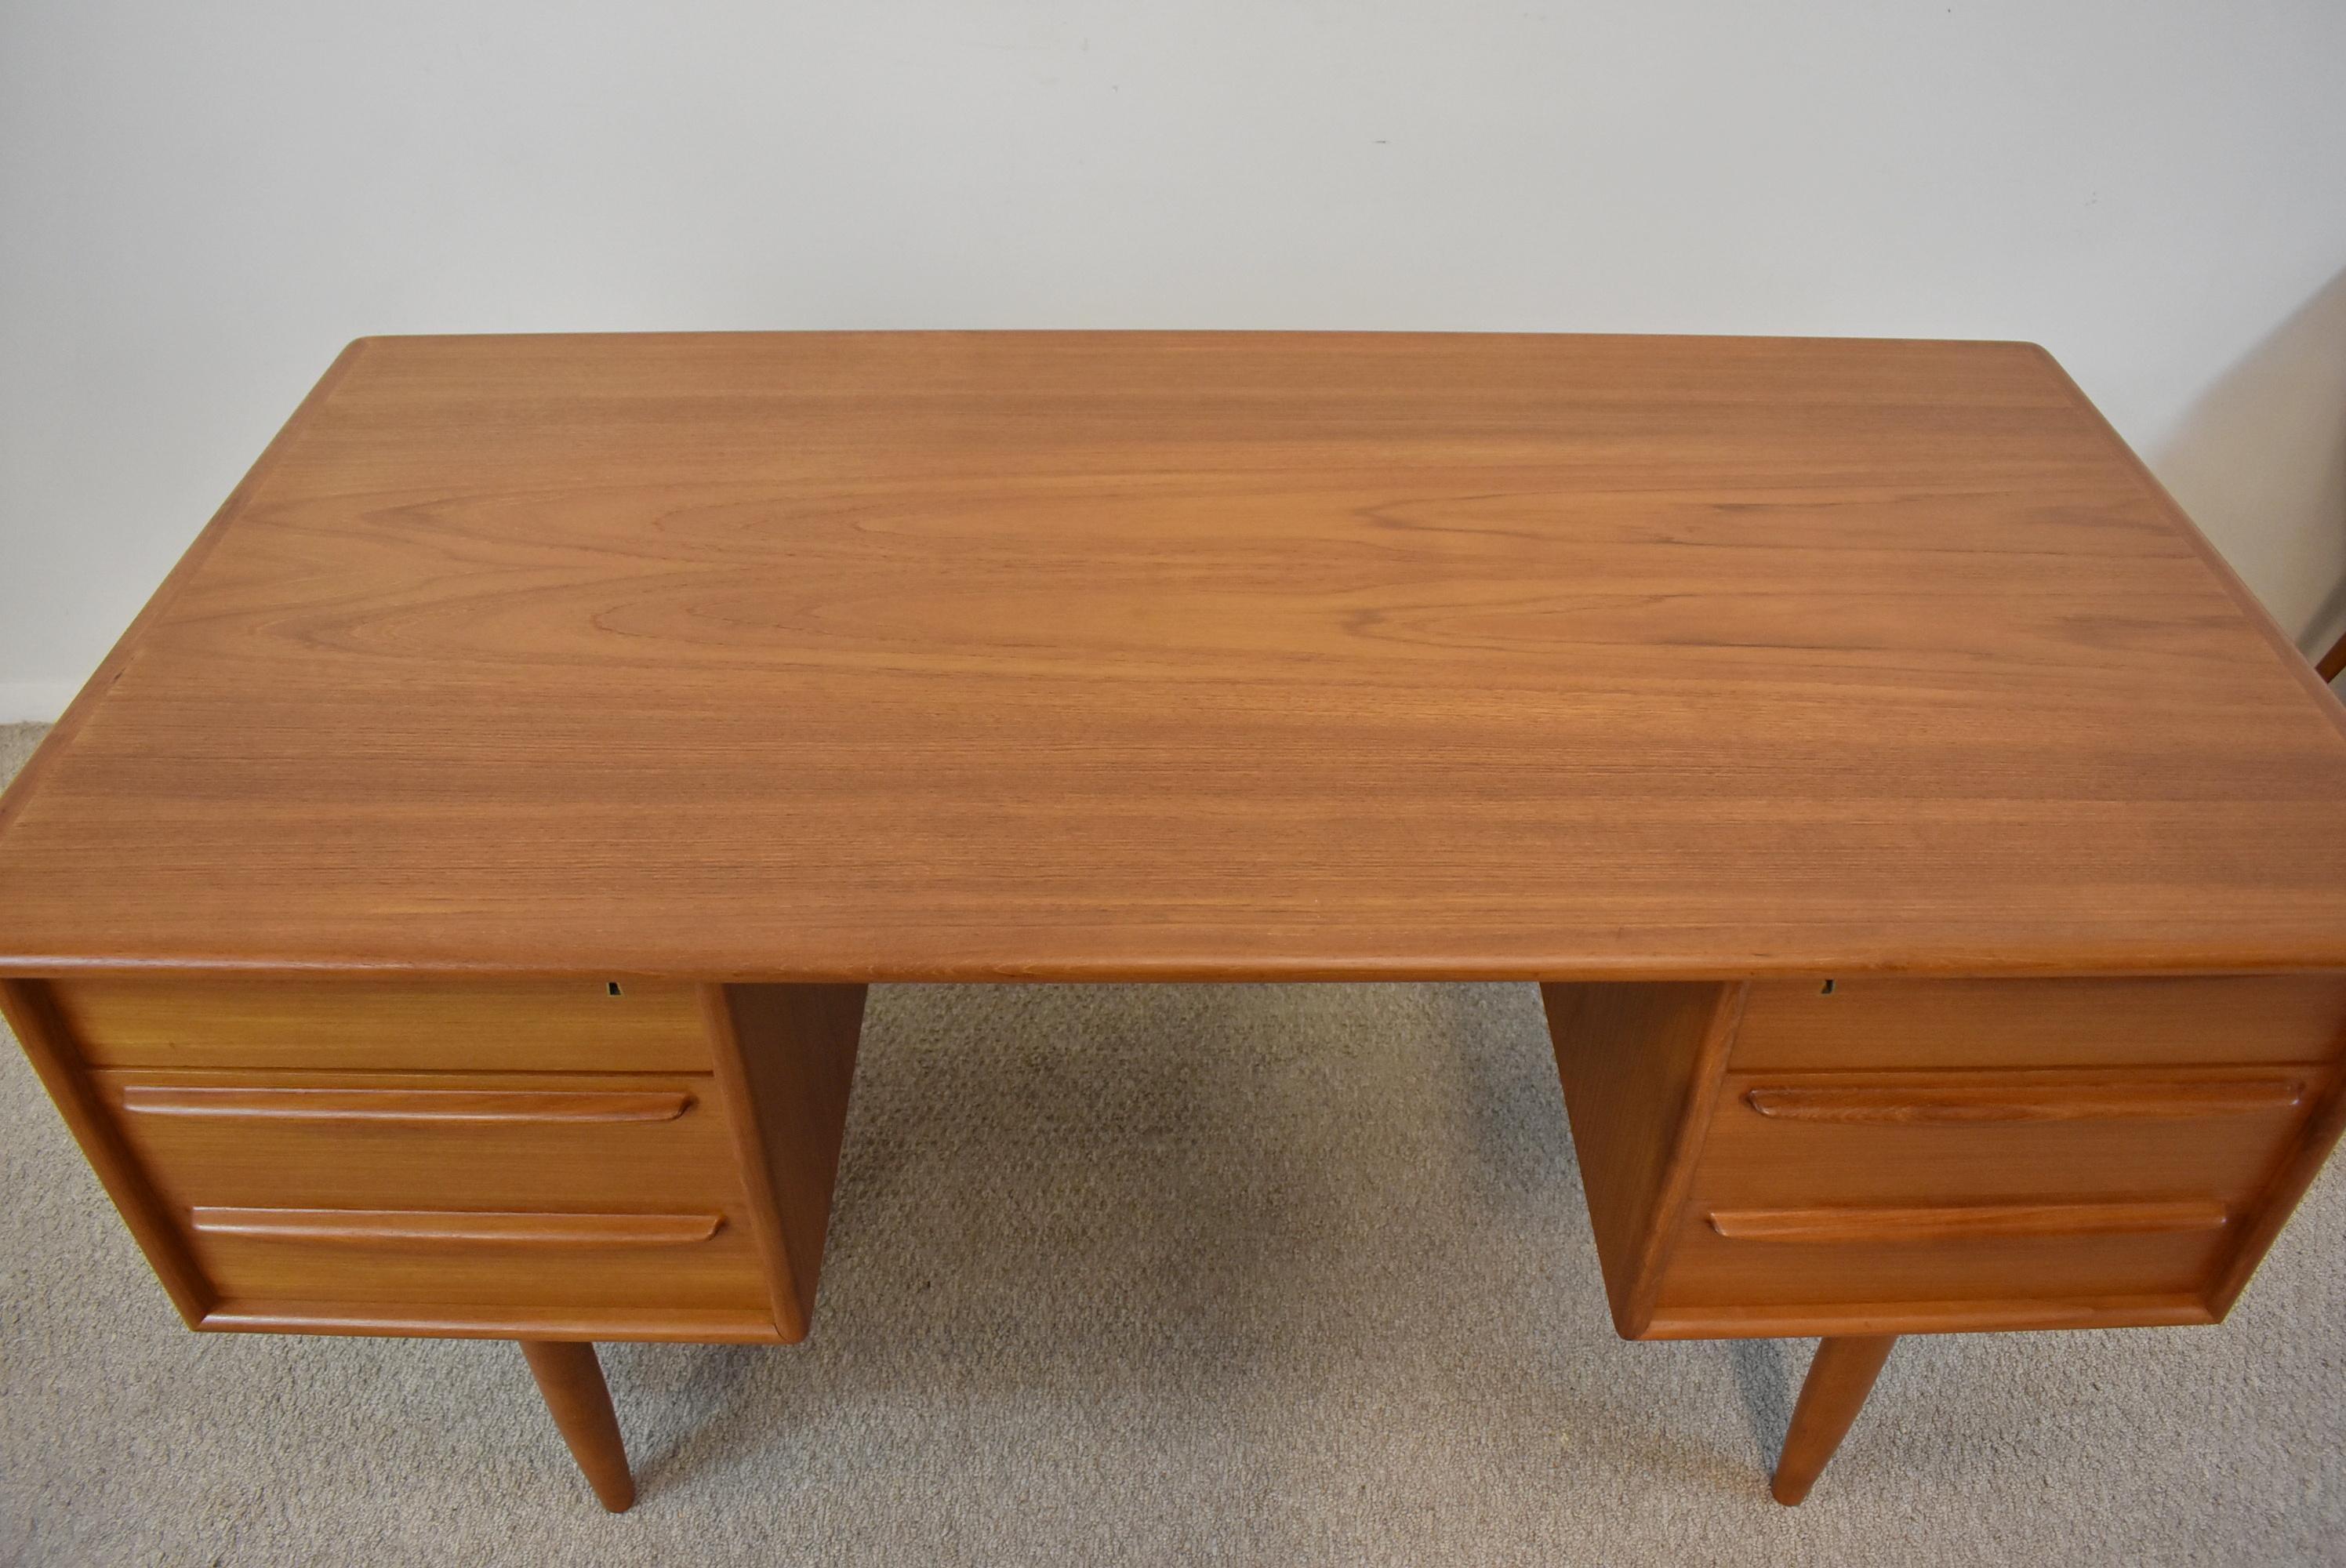 Mid century modern teak desk by Svend Madsen for Falster. Desk has six drawers with tow locking drawers with key. Contoured drawer pulls and dove tail drawer construction. No stains or dents. Excellent condition. 57